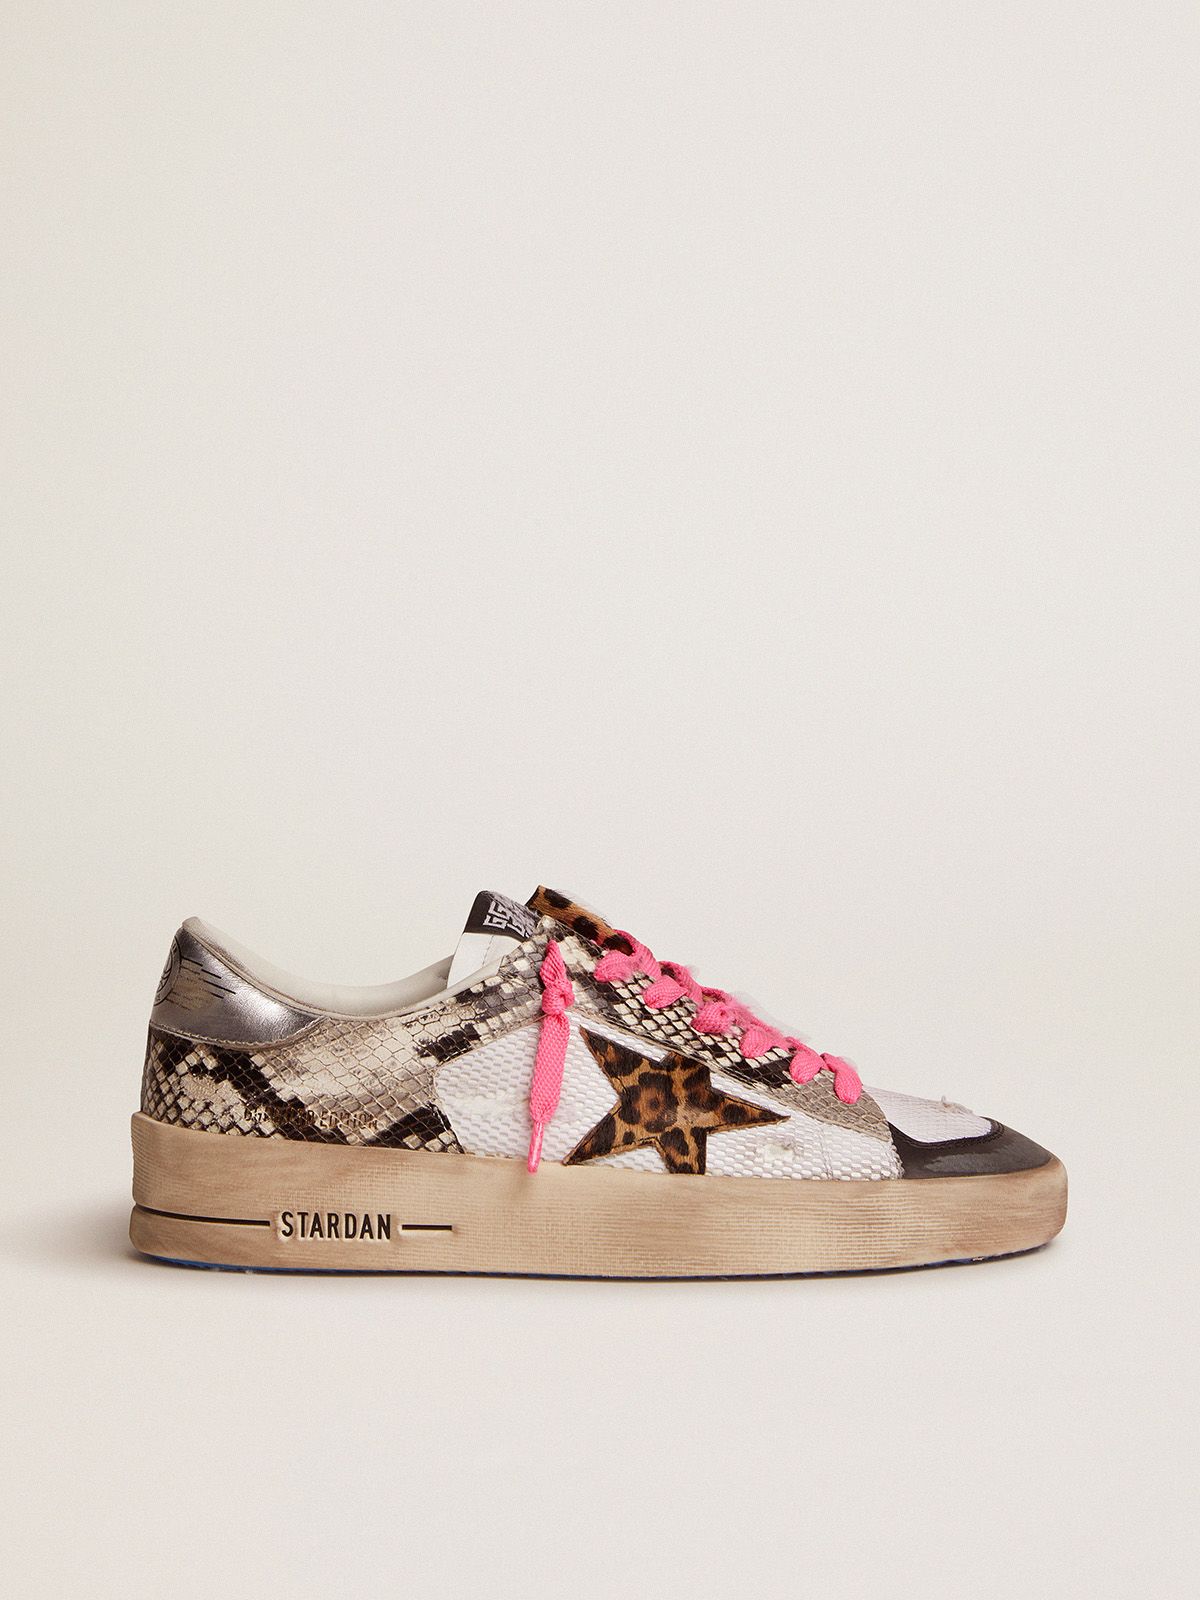 Stardan LAB sneakers with snake-print leather upper and leopard-print pony skin star